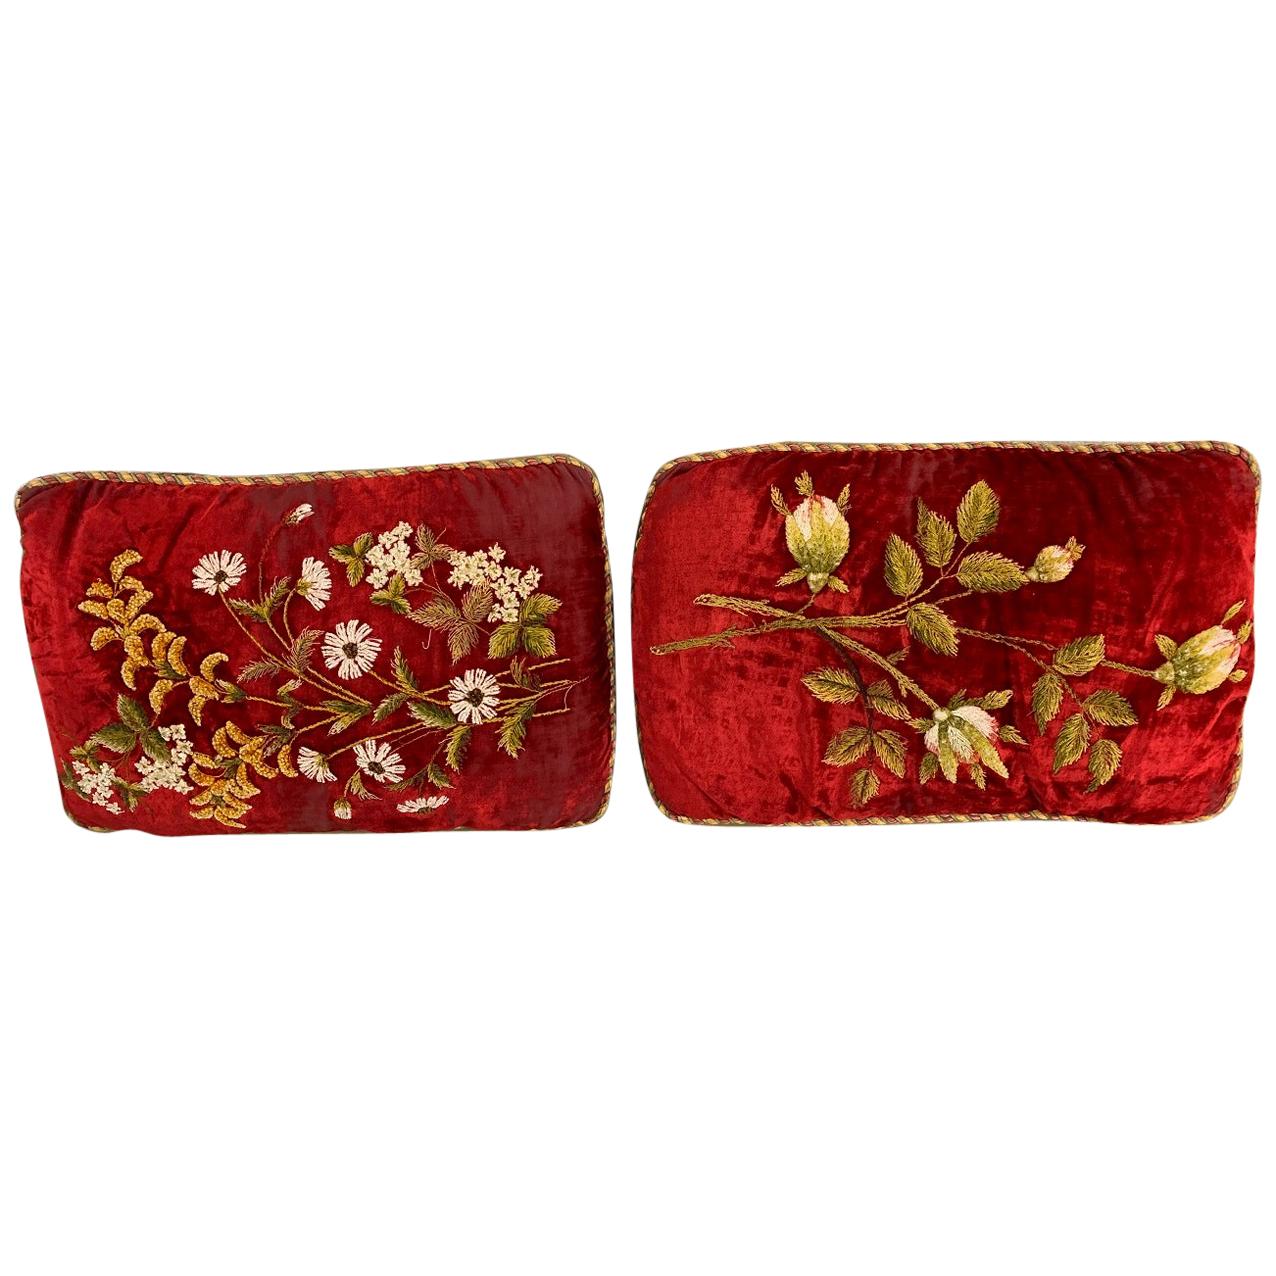 Antique Burgundy Hand Stitched Pillows, Pair For Sale